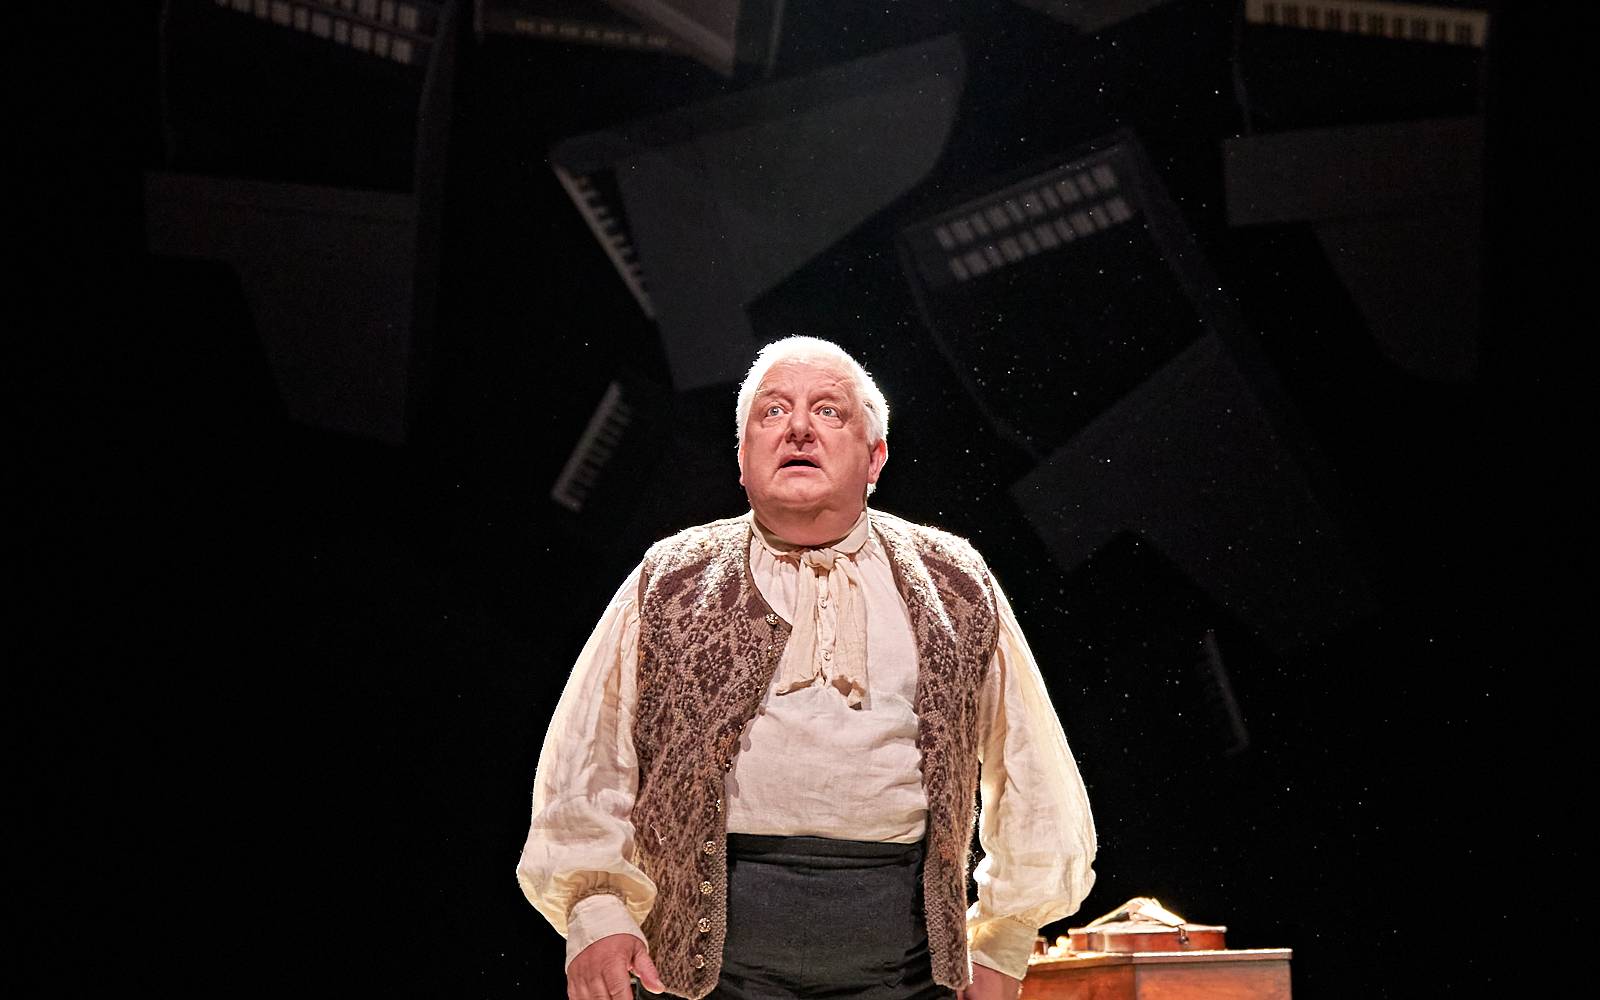 Simon Russell Beale, with short grey hair and dressed in 18th-century clothing, stands in front of a wooden keyboard instrument. Above his head, black harpsichords are suspended from the ceiling.